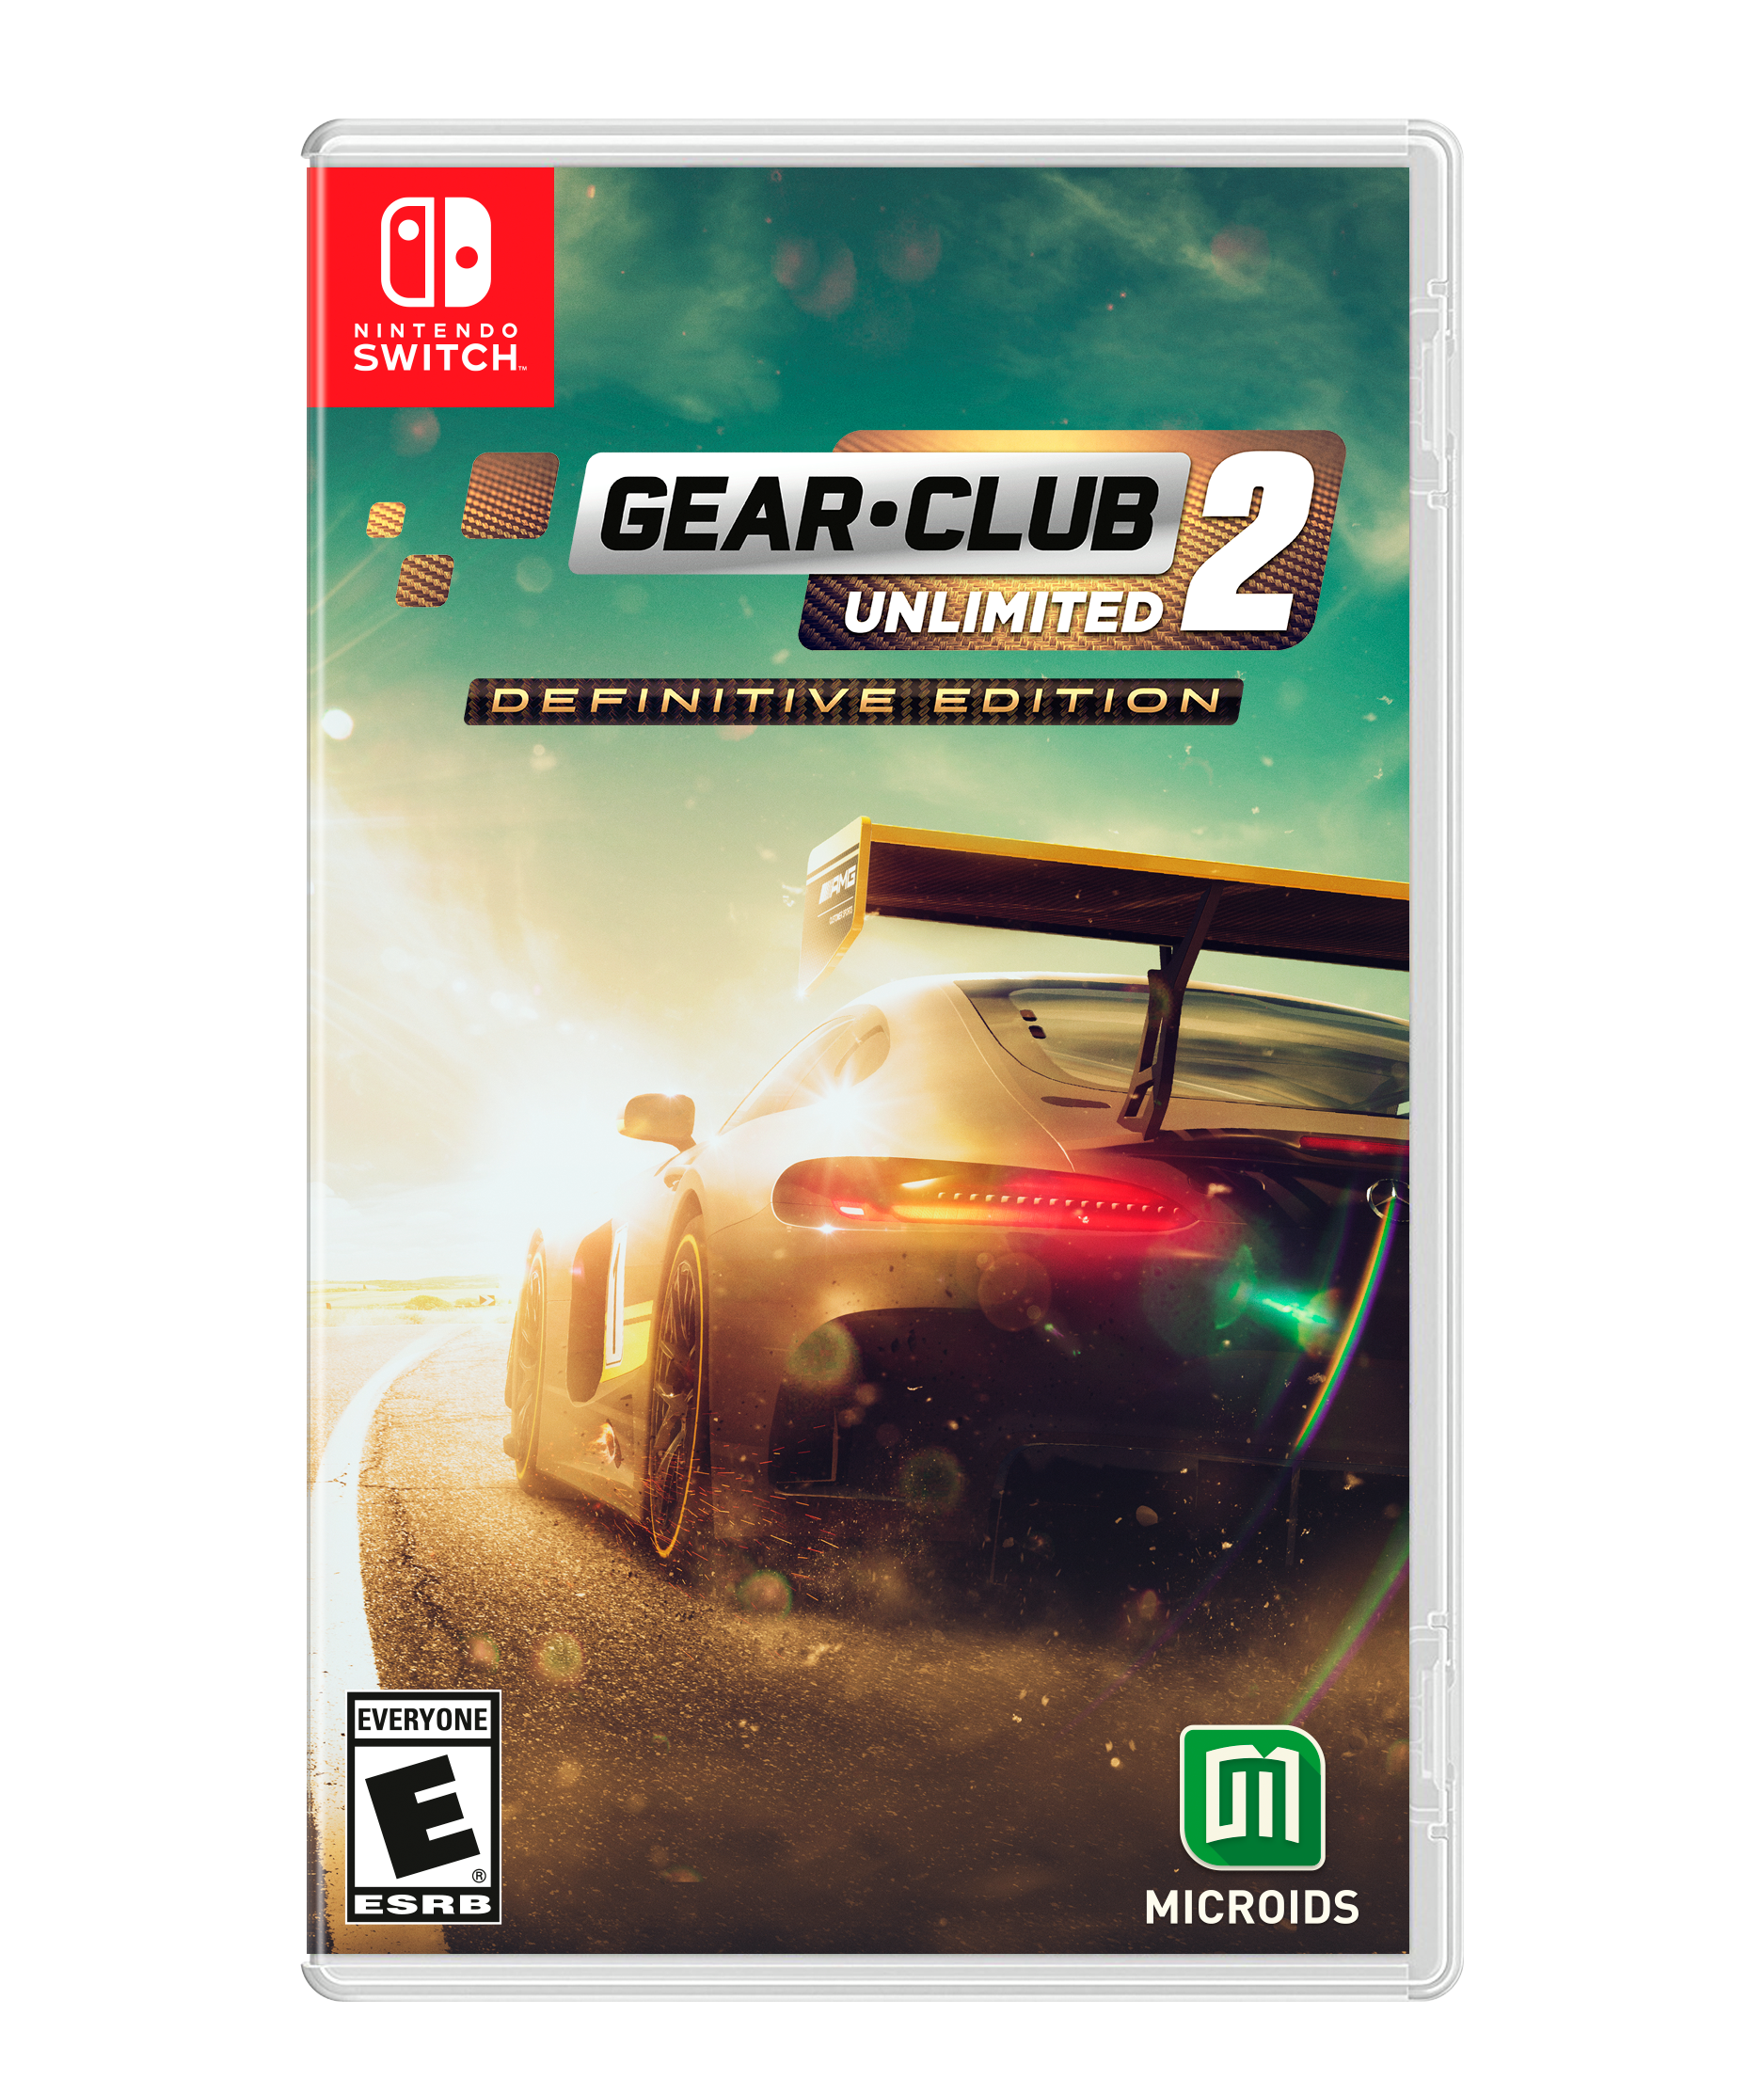 Gear Club Unlimited 2: Definitive Edition - Nintendo Switch (Microids), New - GameStop